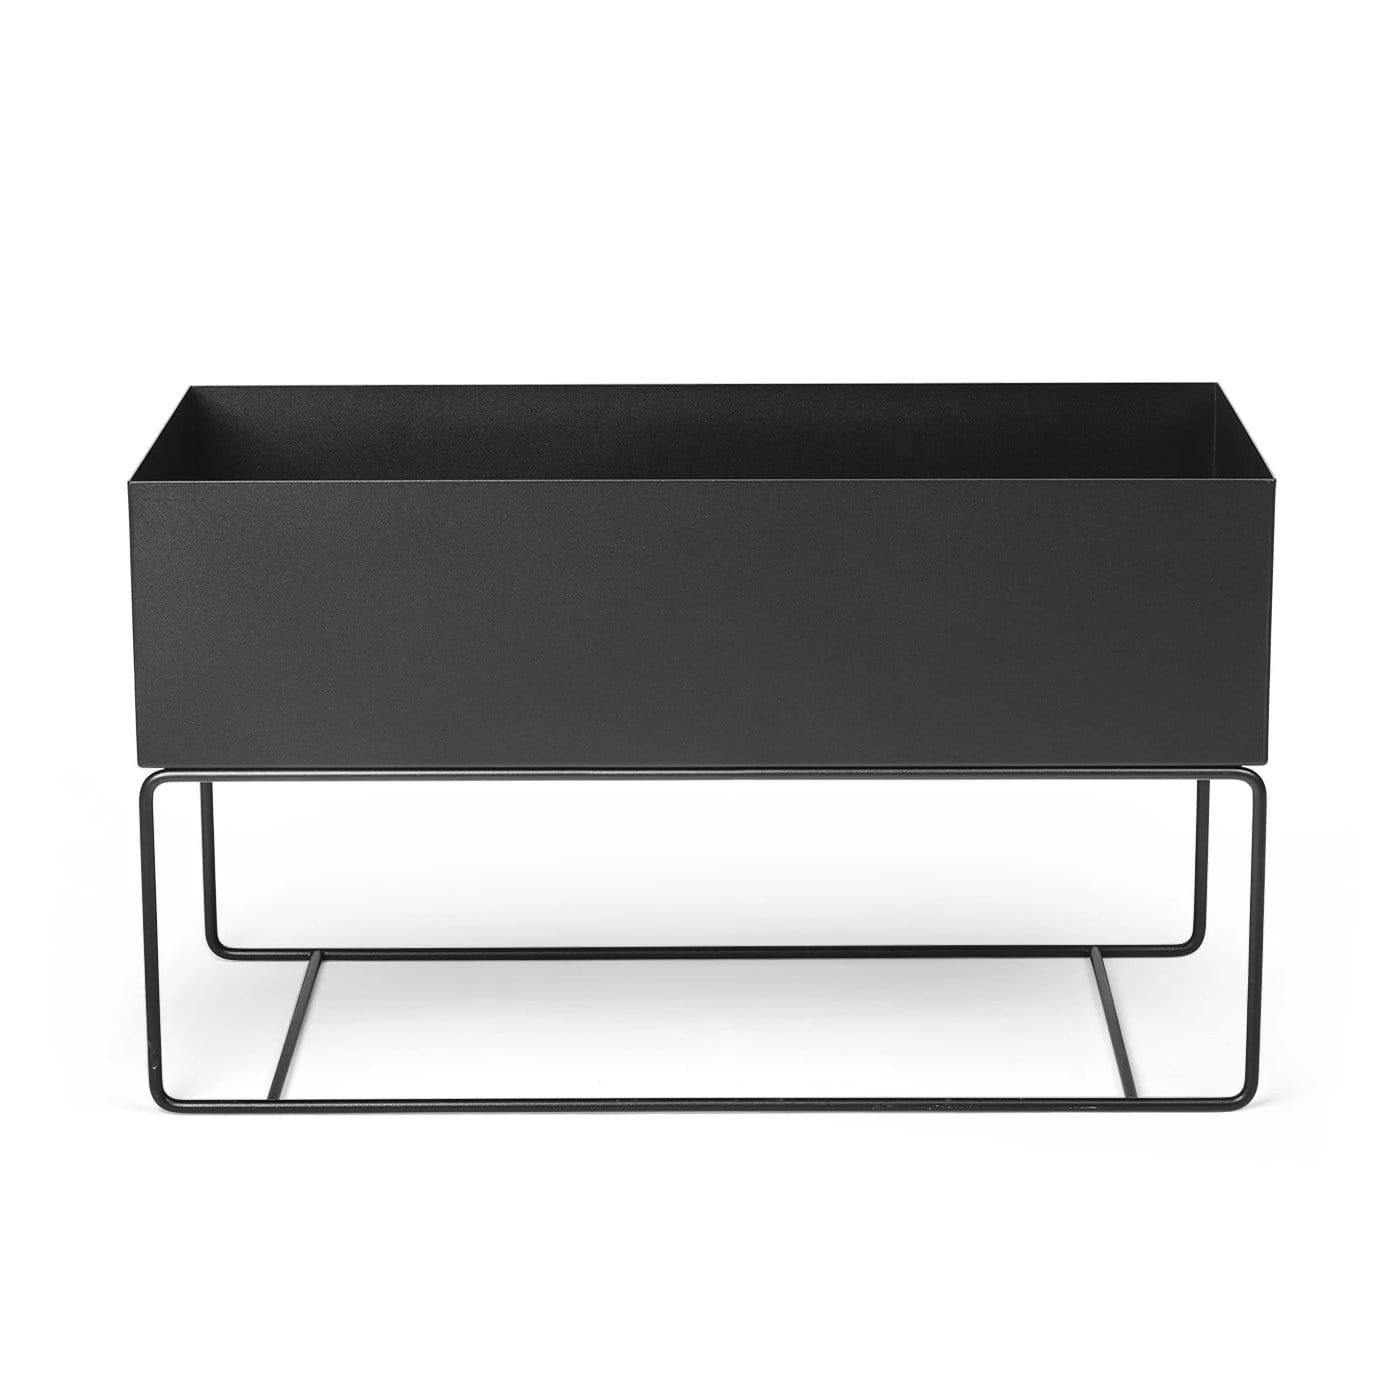 Ferm Living Plant Box Large. Available from someday designs. #colour_black